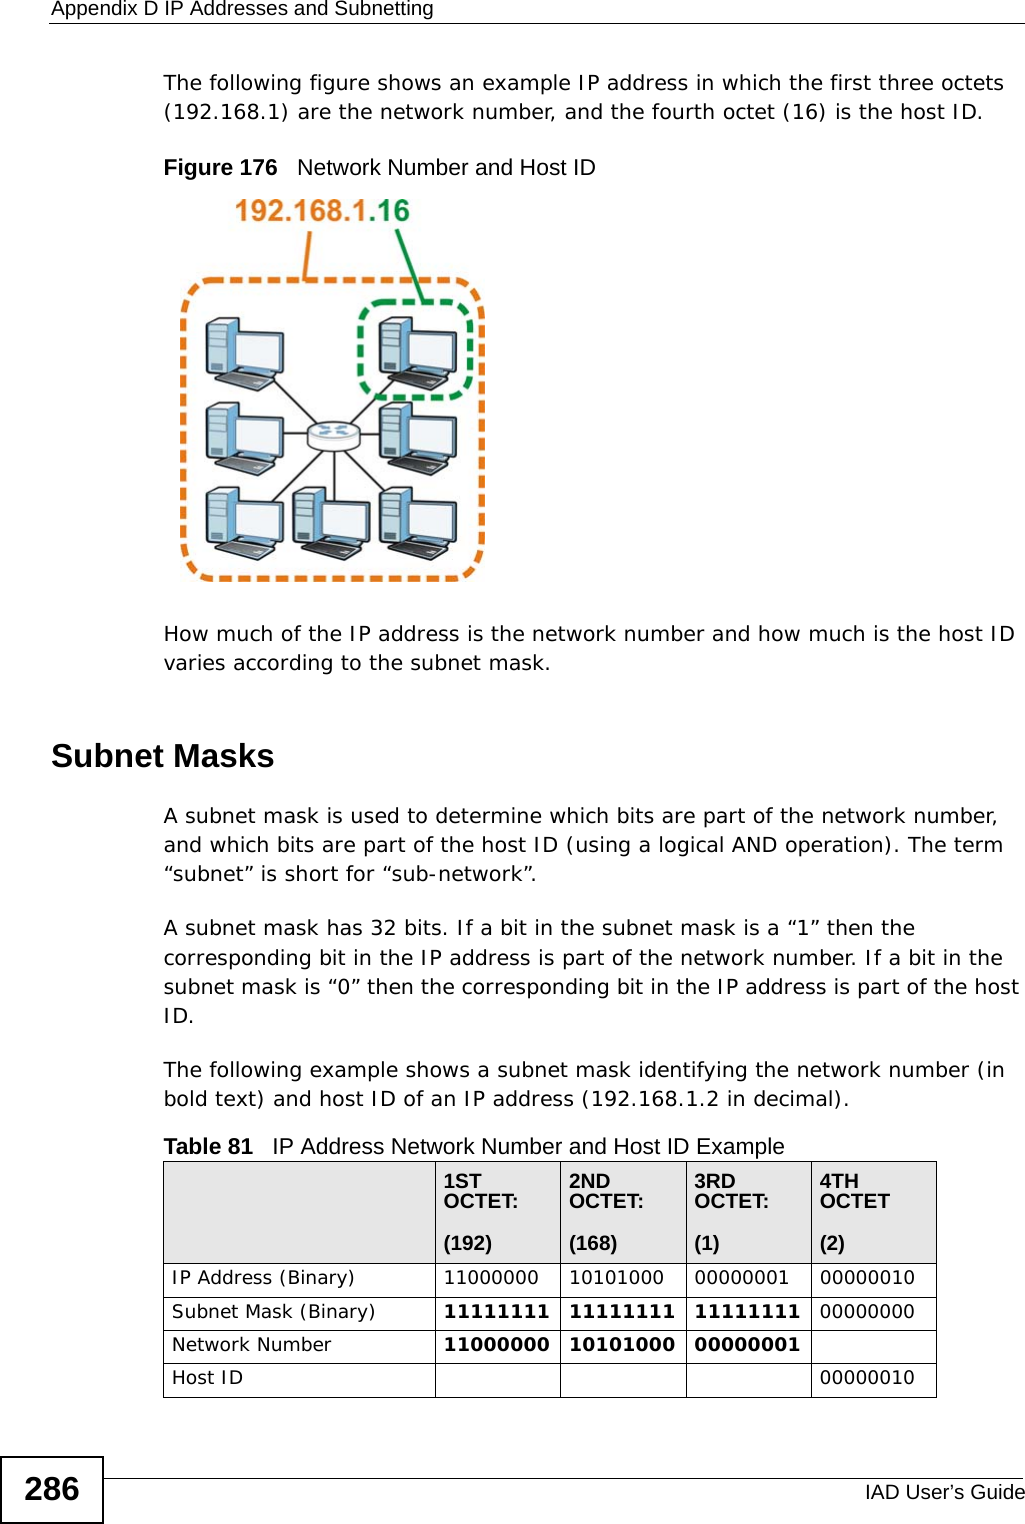 Appendix D IP Addresses and SubnettingIAD User’s Guide286The following figure shows an example IP address in which the first three octets (192.168.1) are the network number, and the fourth octet (16) is the host ID.Figure 176   Network Number and Host IDHow much of the IP address is the network number and how much is the host ID varies according to the subnet mask.  Subnet MasksA subnet mask is used to determine which bits are part of the network number, and which bits are part of the host ID (using a logical AND operation). The term “subnet” is short for “sub-network”.A subnet mask has 32 bits. If a bit in the subnet mask is a “1” then the corresponding bit in the IP address is part of the network number. If a bit in the subnet mask is “0” then the corresponding bit in the IP address is part of the host ID. The following example shows a subnet mask identifying the network number (in bold text) and host ID of an IP address (192.168.1.2 in decimal).Table 81   IP Address Network Number and Host ID Example1ST OCTET:(192)2ND OCTET:(168)3RD OCTET:(1)4TH OCTET(2)IP Address (Binary) 11000000 10101000 00000001 00000010Subnet Mask (Binary) 11111111 11111111 11111111 00000000Network Number 11000000 10101000 00000001Host ID 00000010